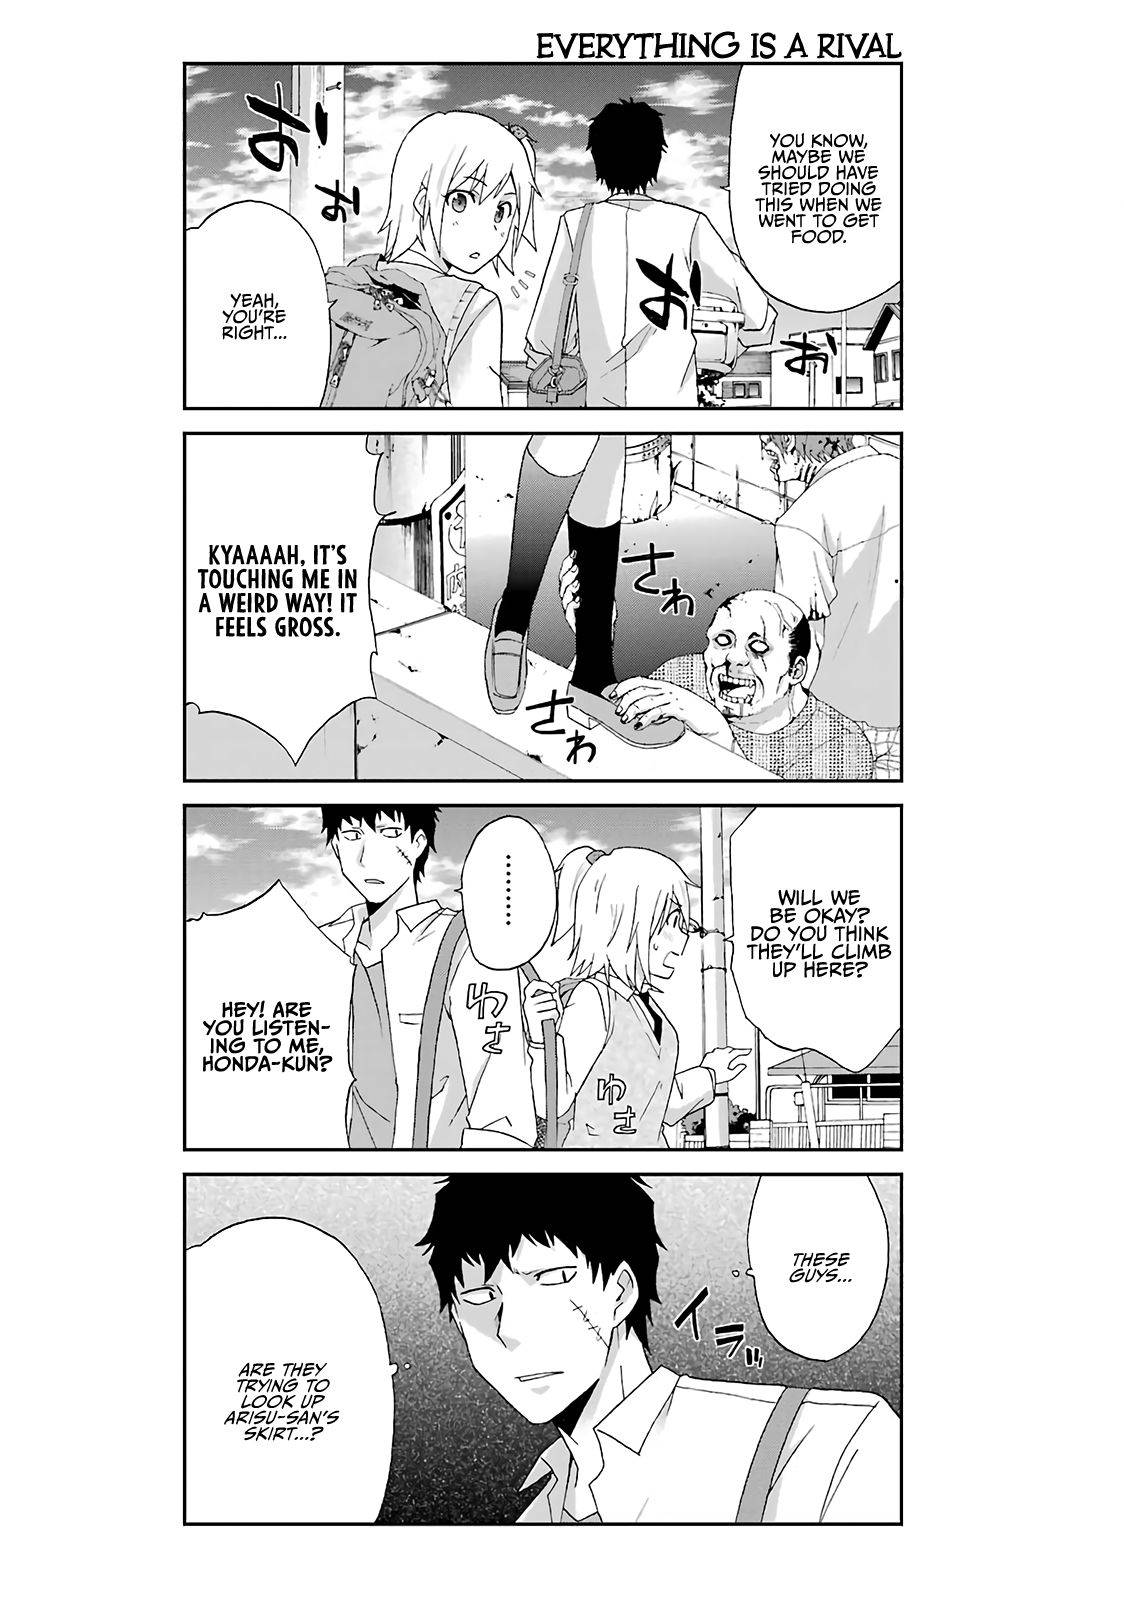 Are You Alive Honda-Kun? - chapter 6 - #4